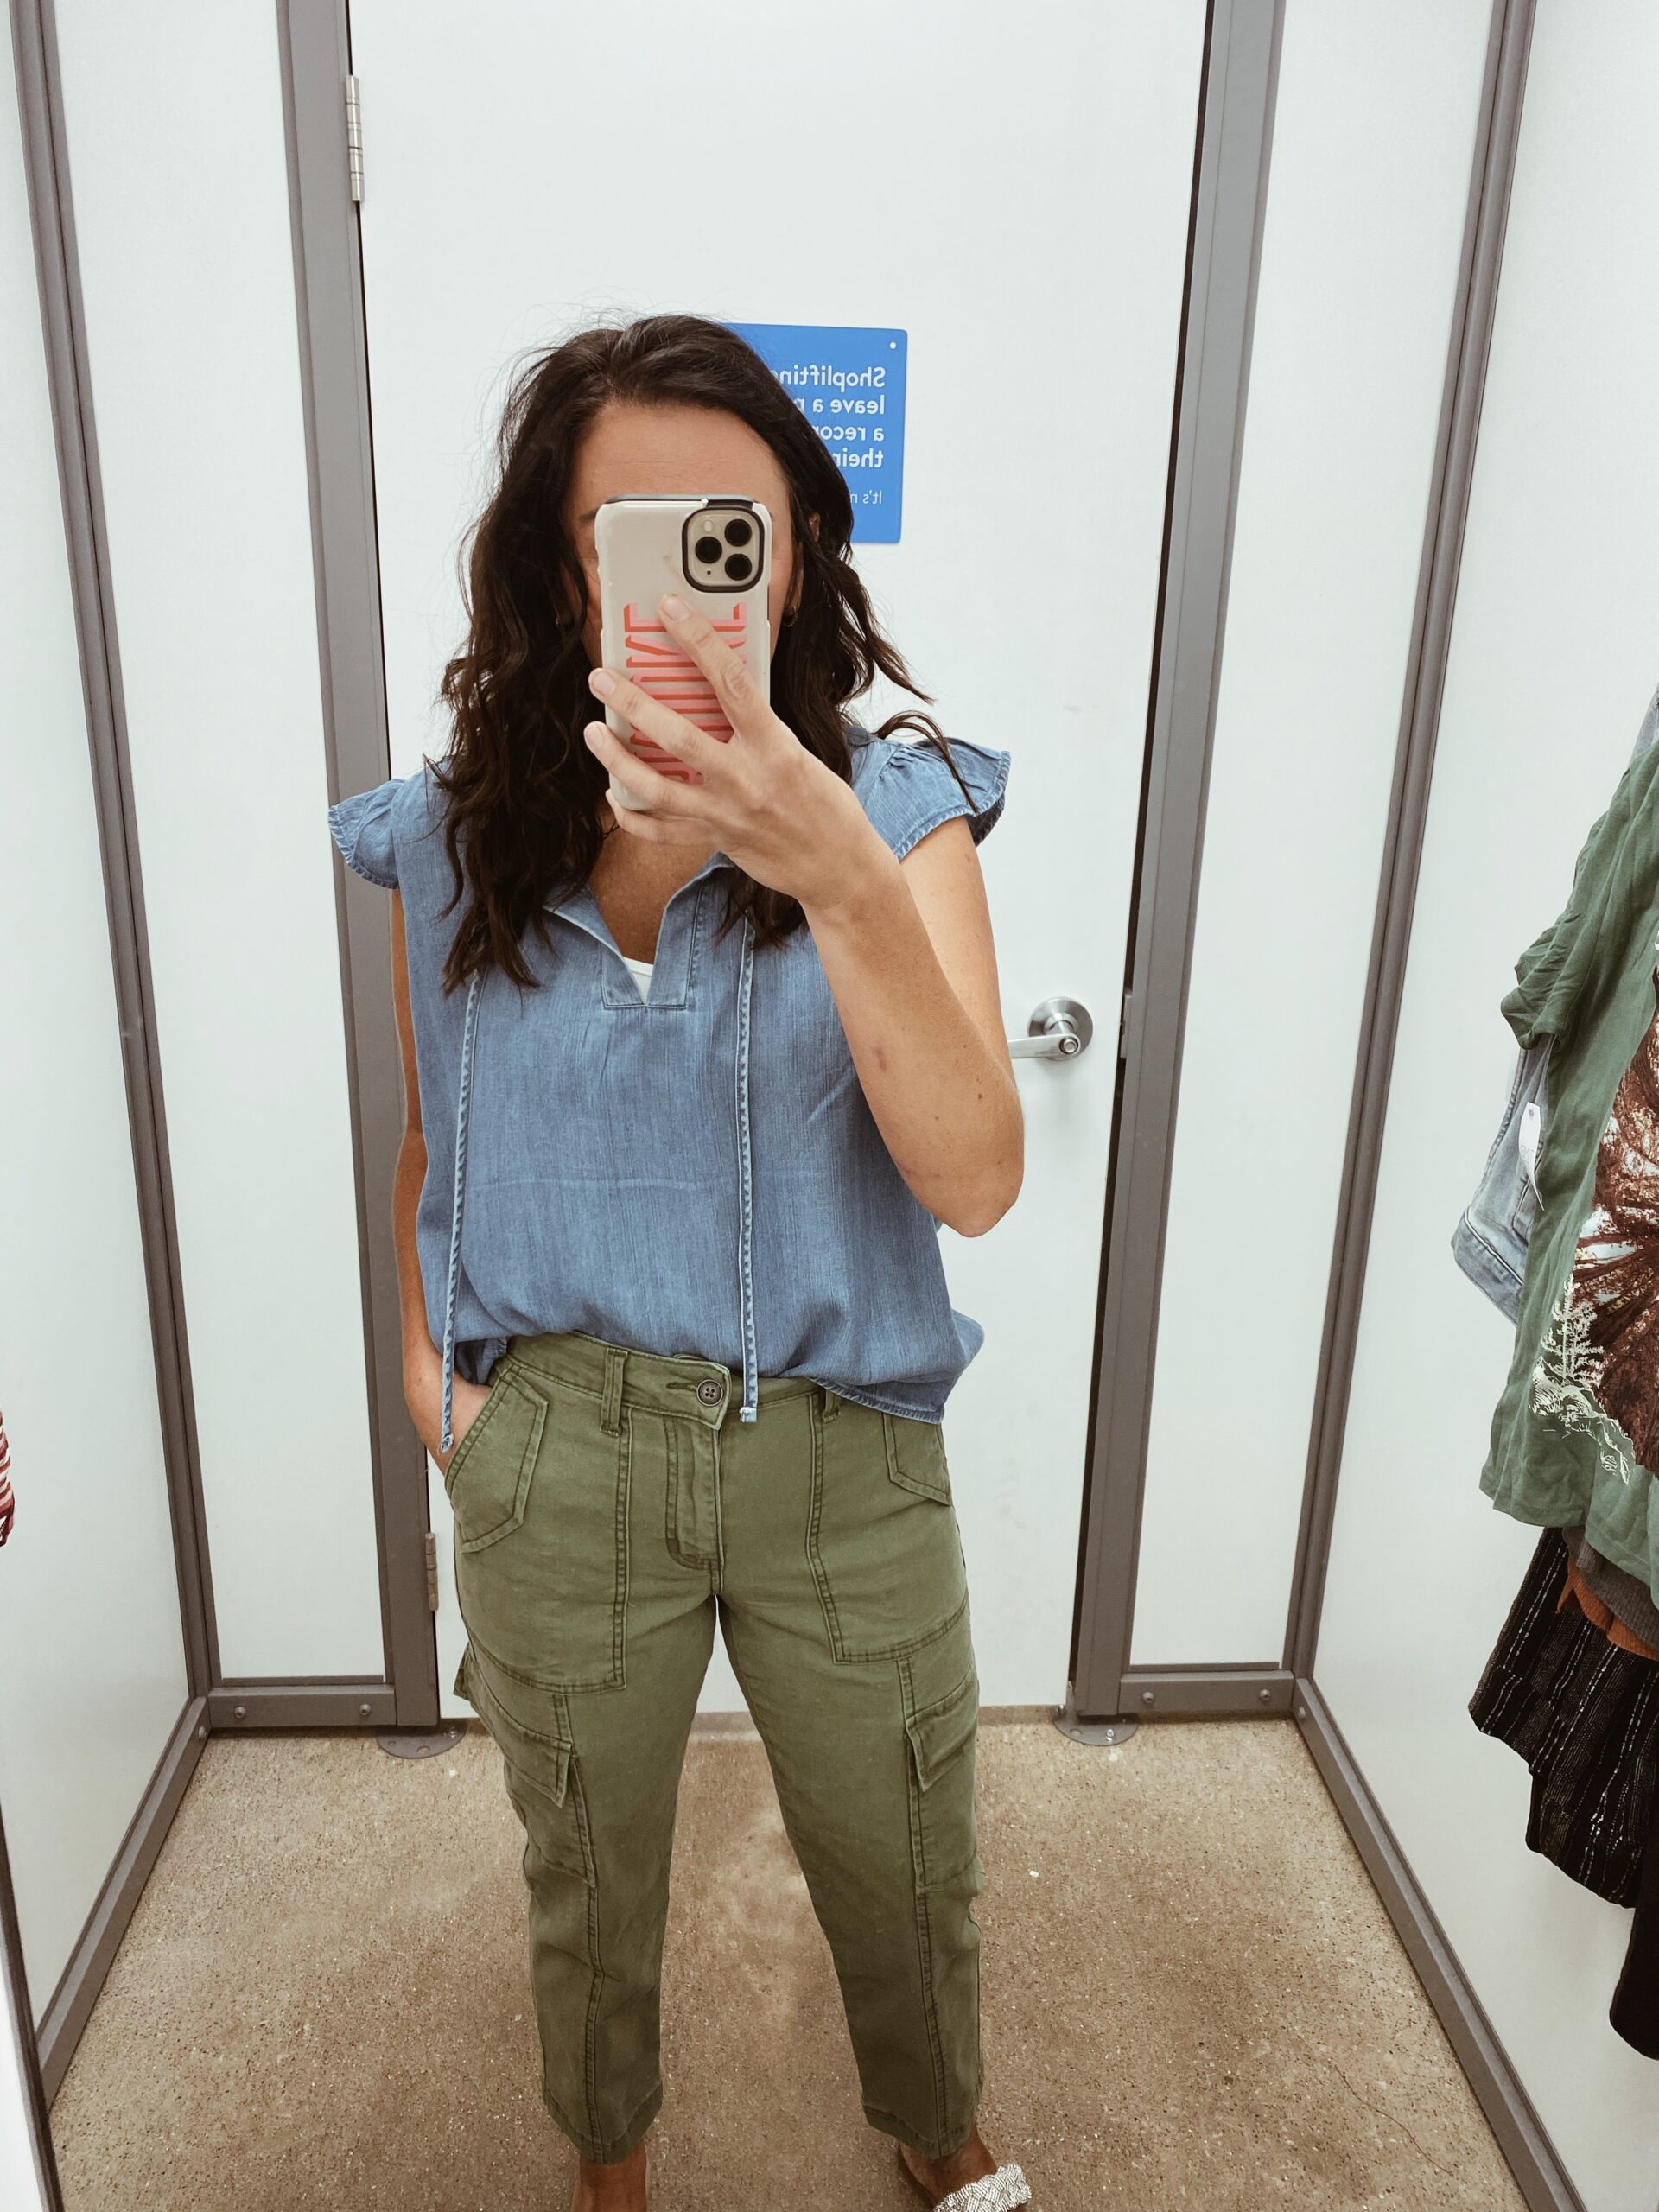 Woman wearing cargo pants and denim shirt as an example of cute teacher outfits